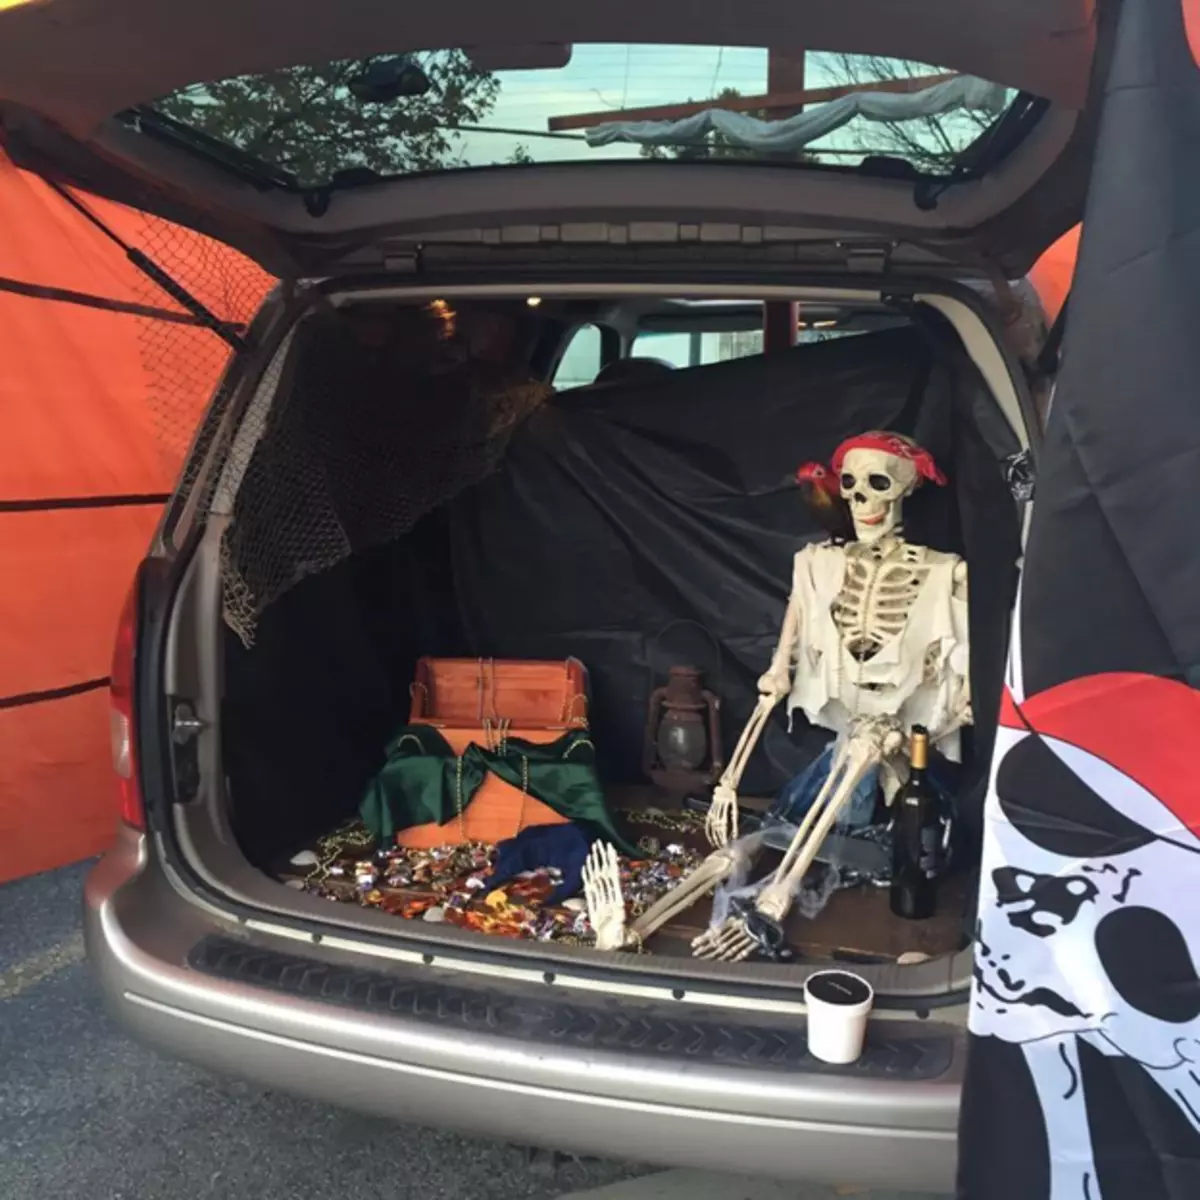 New to Idaho and Wondering What's a Trunk or Treat?